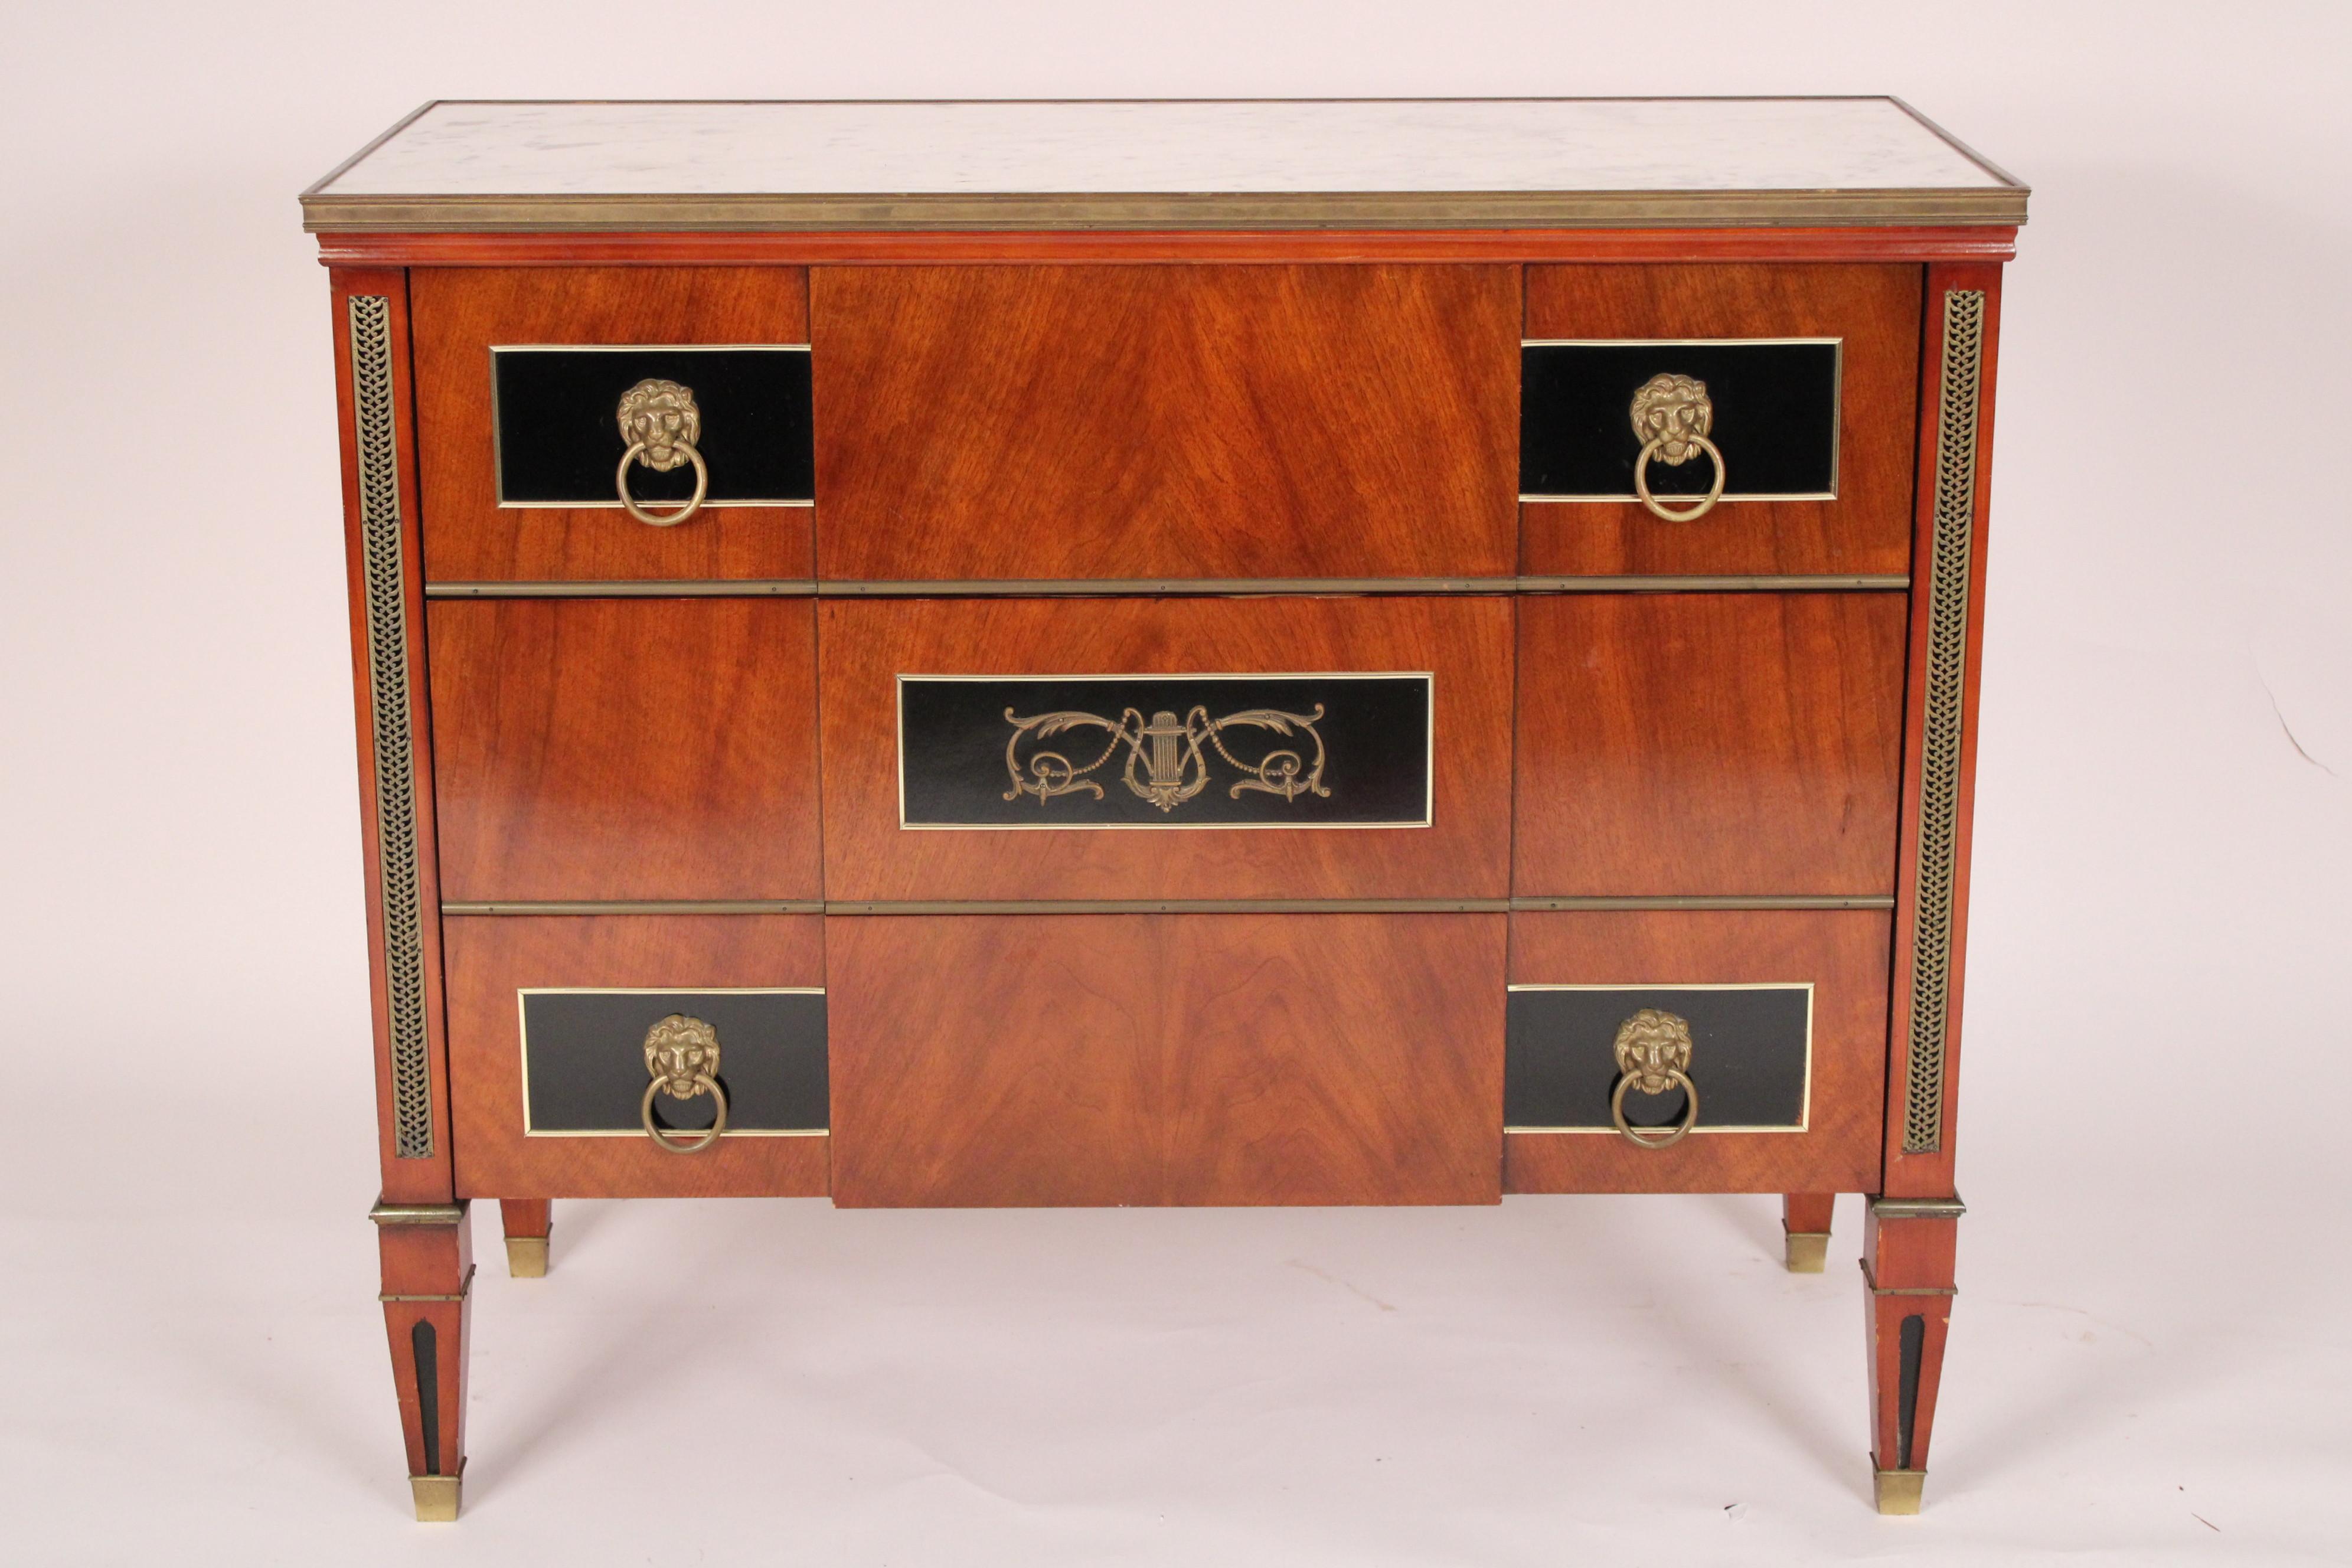 Russian or Swedish style Louis XVI mahogany, lacquer and brass chest of drawers, circa 1980's. With a rectangular carrera marble top with brass banding, 3 drawers the top and bottom drawers with black lacquered panels with brass lion head pulls, the